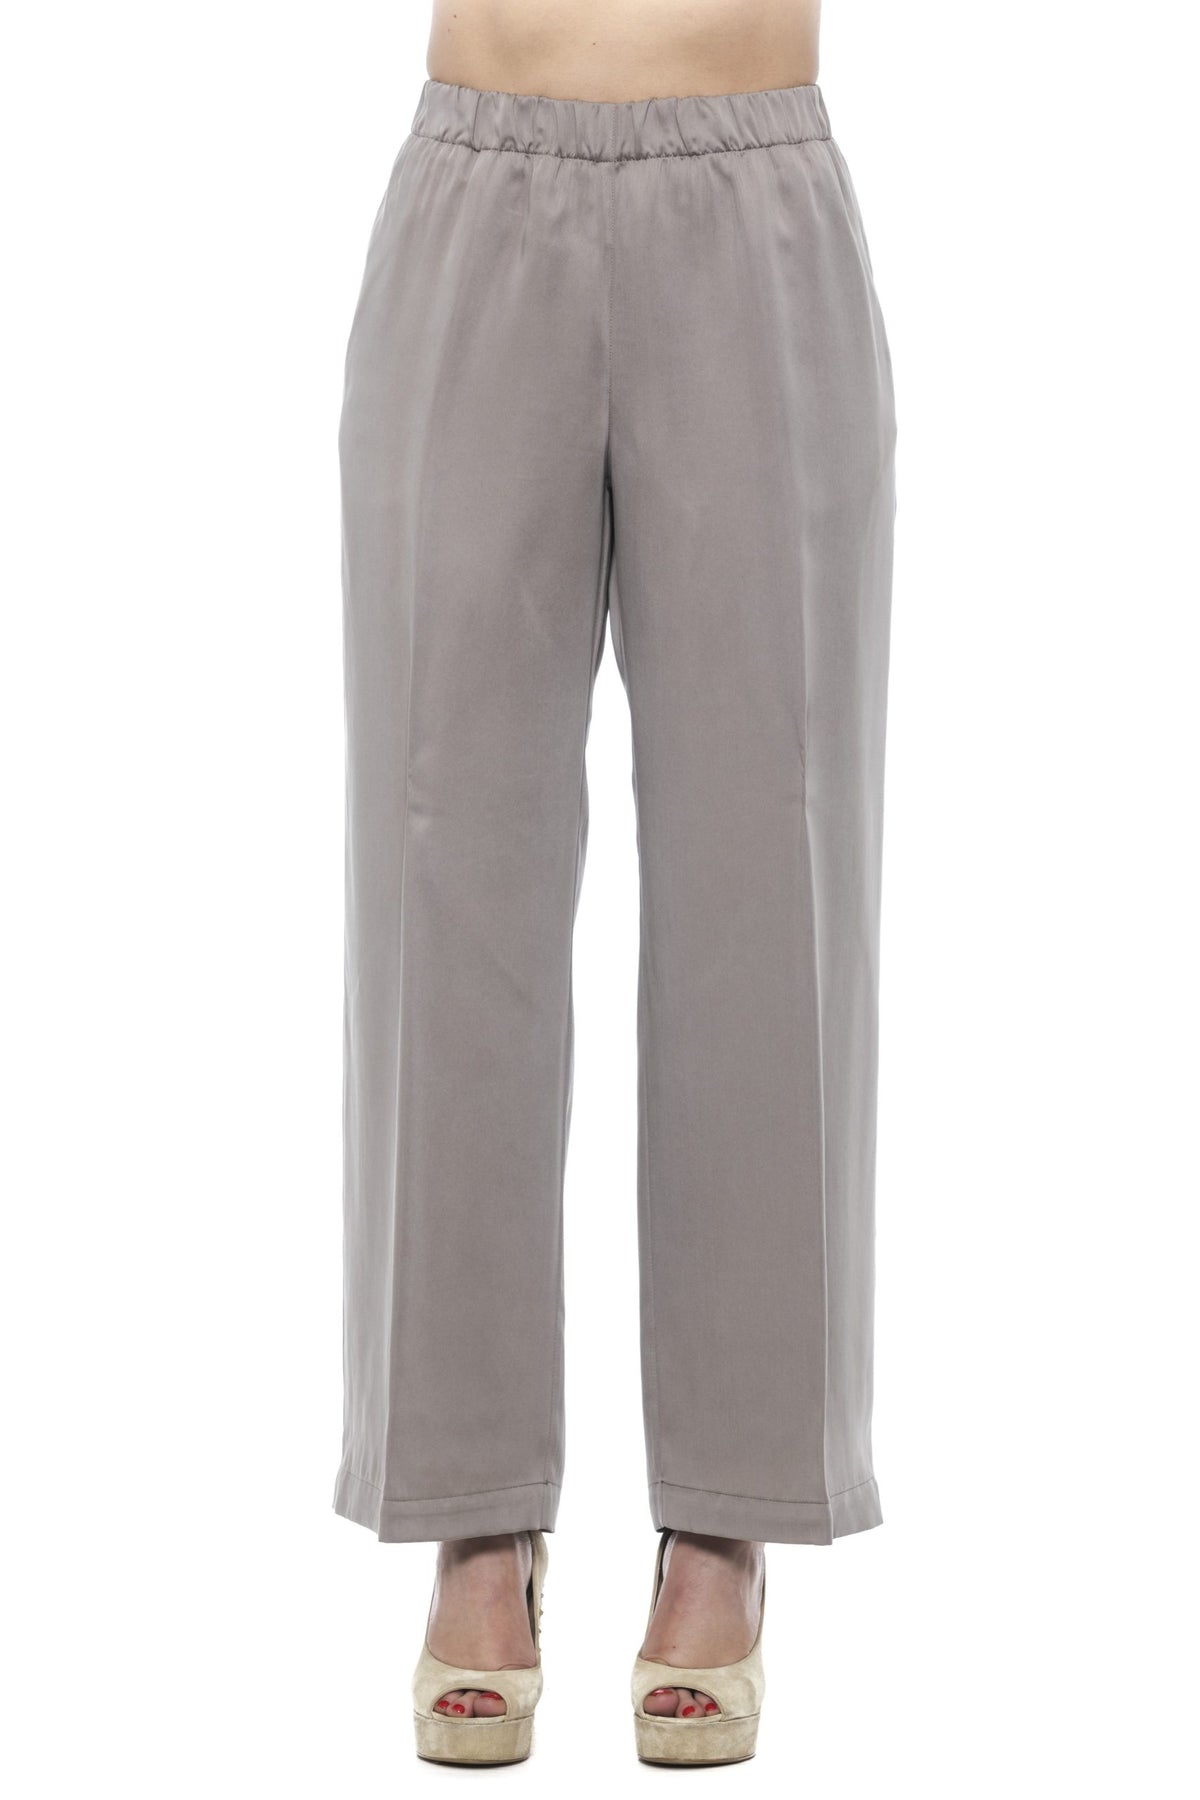 PESERICO High Waist Wide Fit Grey Pant